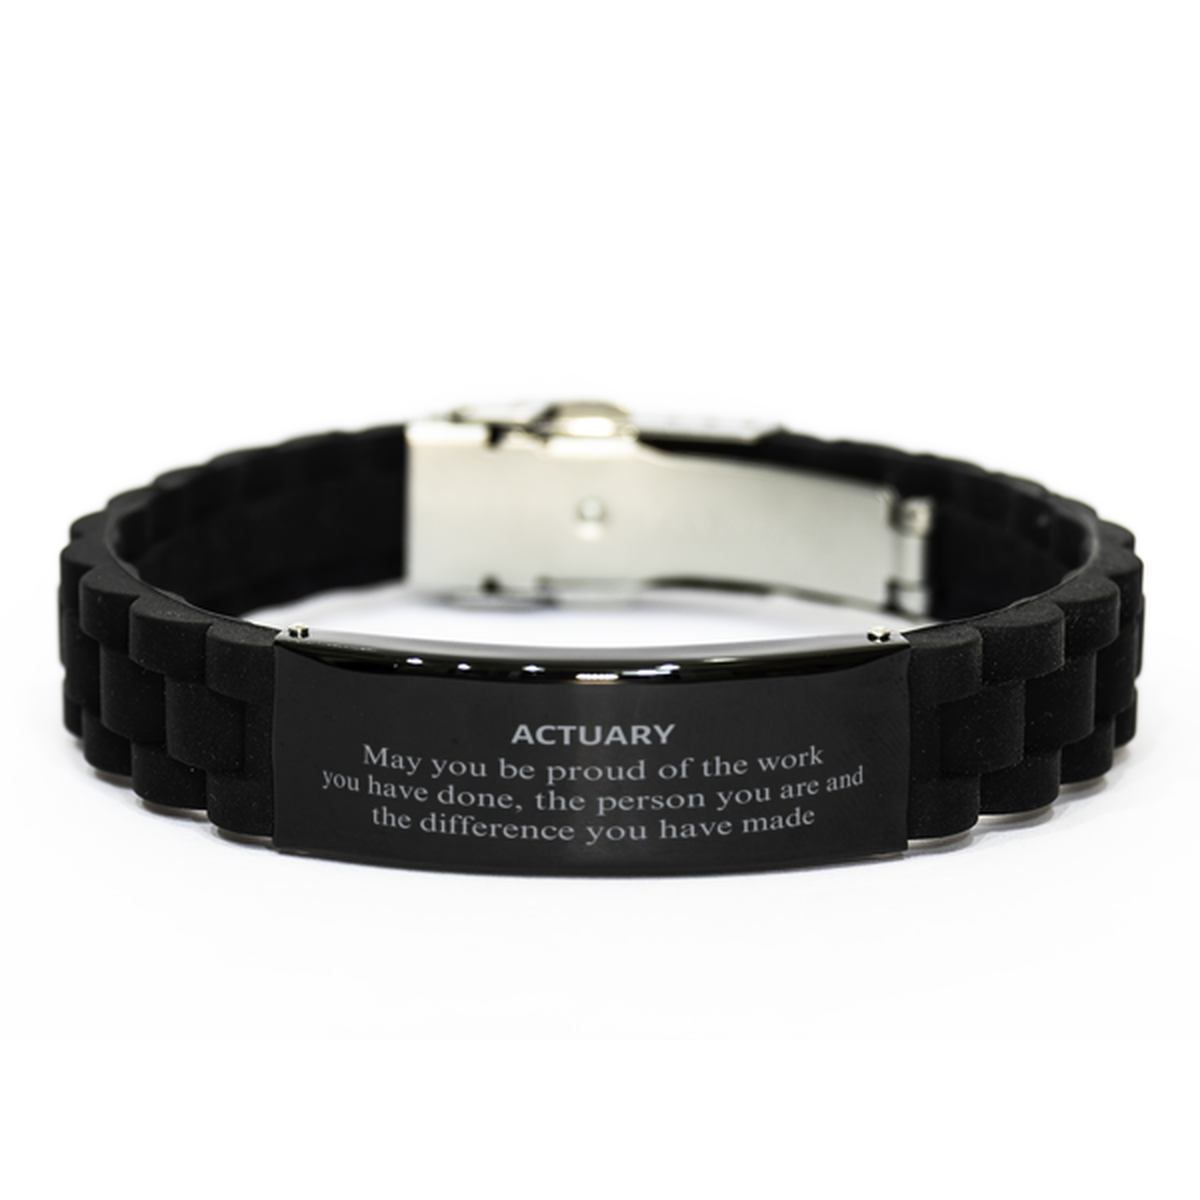 Actuary May you be proud of the work you have done, Retirement Actuary Black Glidelock Clasp Bracelet for Colleague Appreciation Gifts Amazing for Actuary